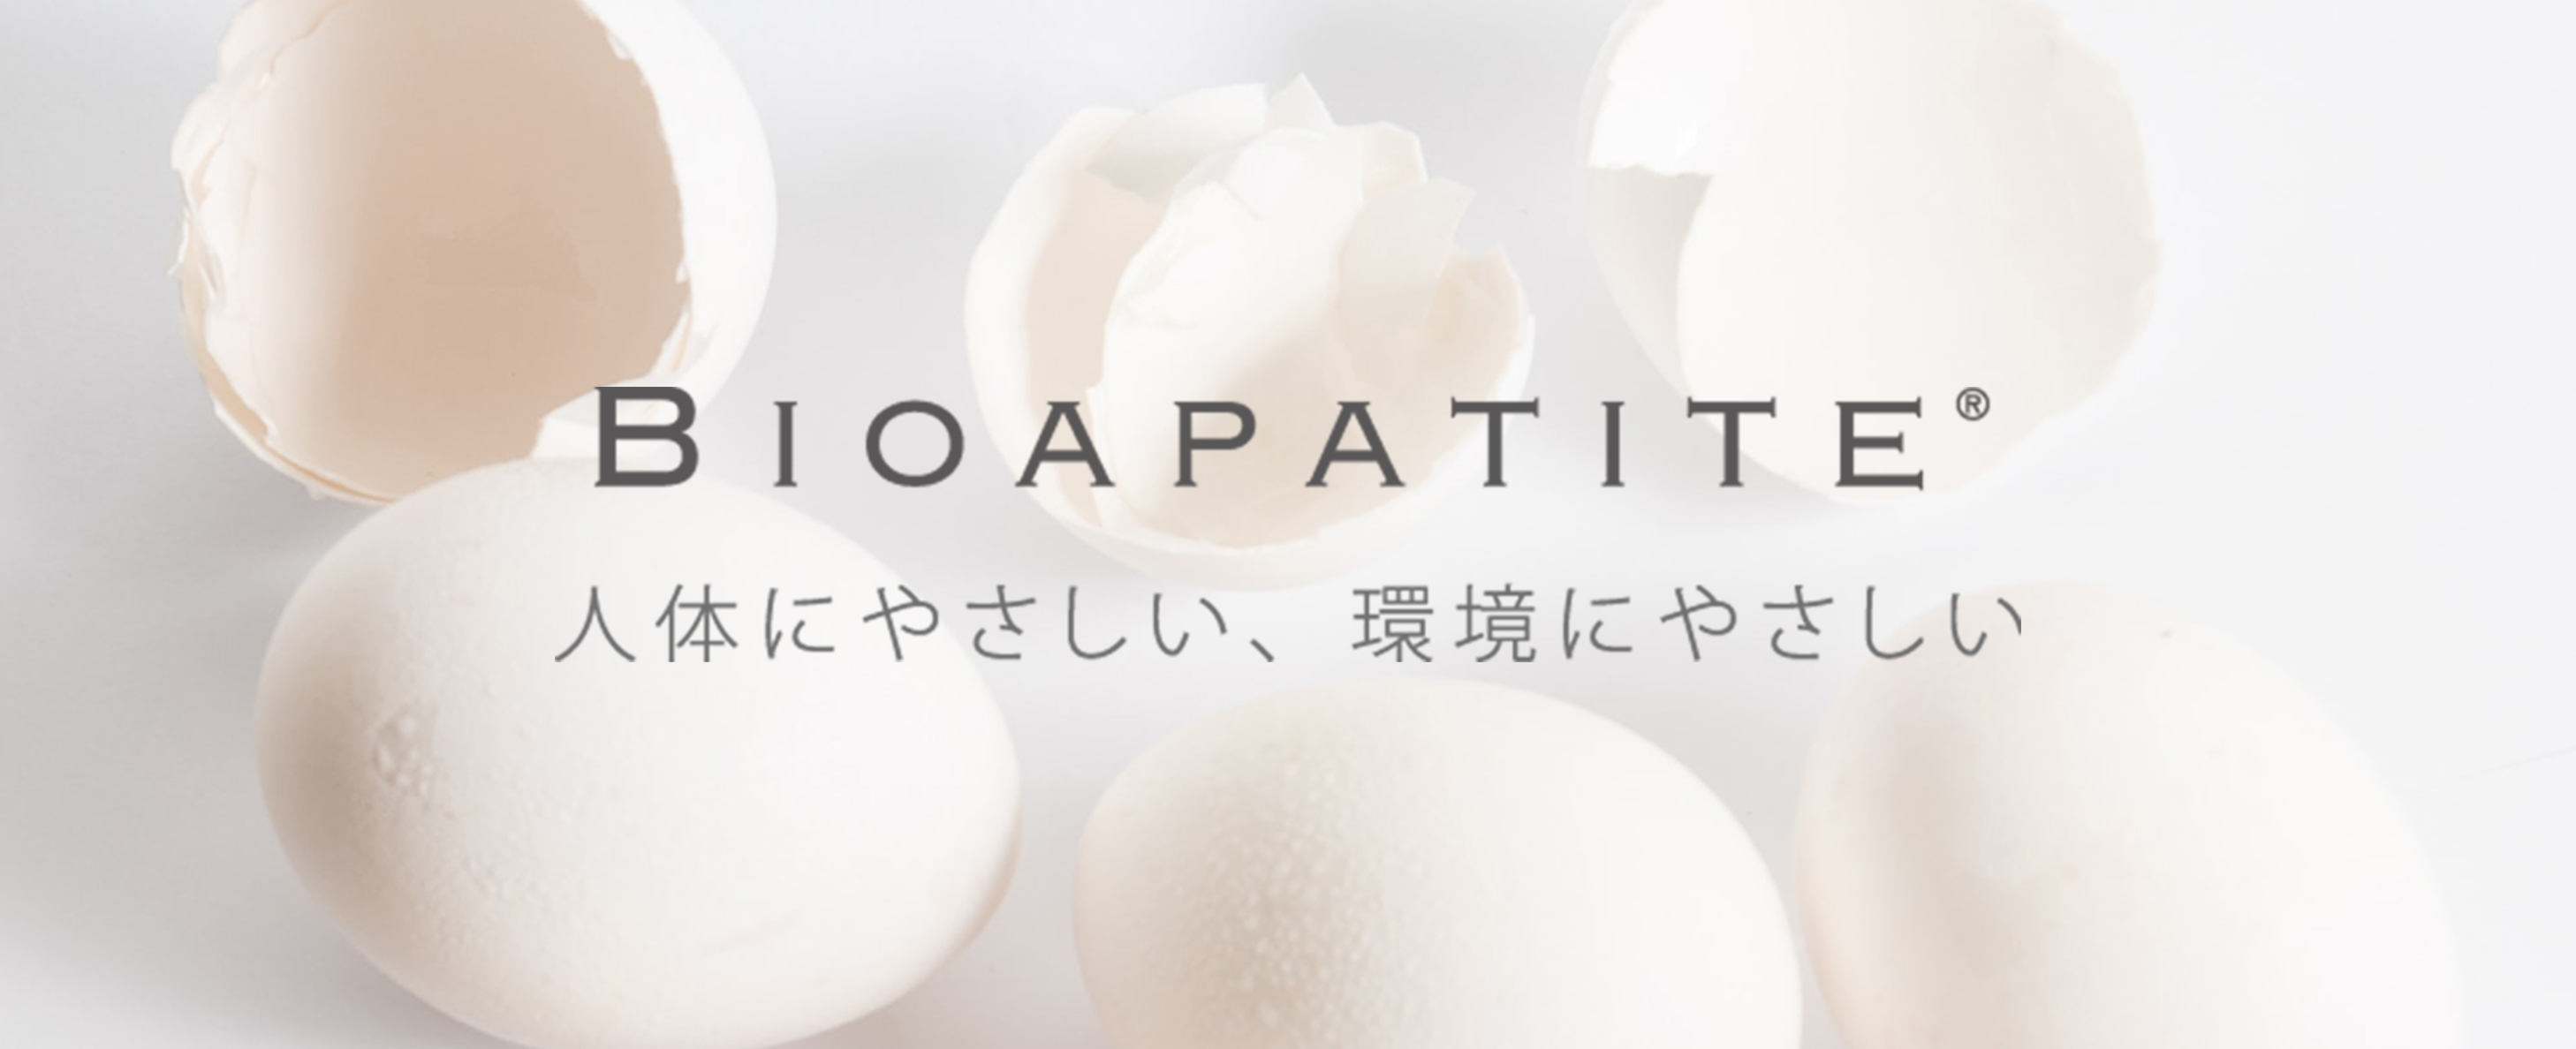 BioApatite, a bio-based material that breathes new life into
          eggshell, an unnecessary resource image